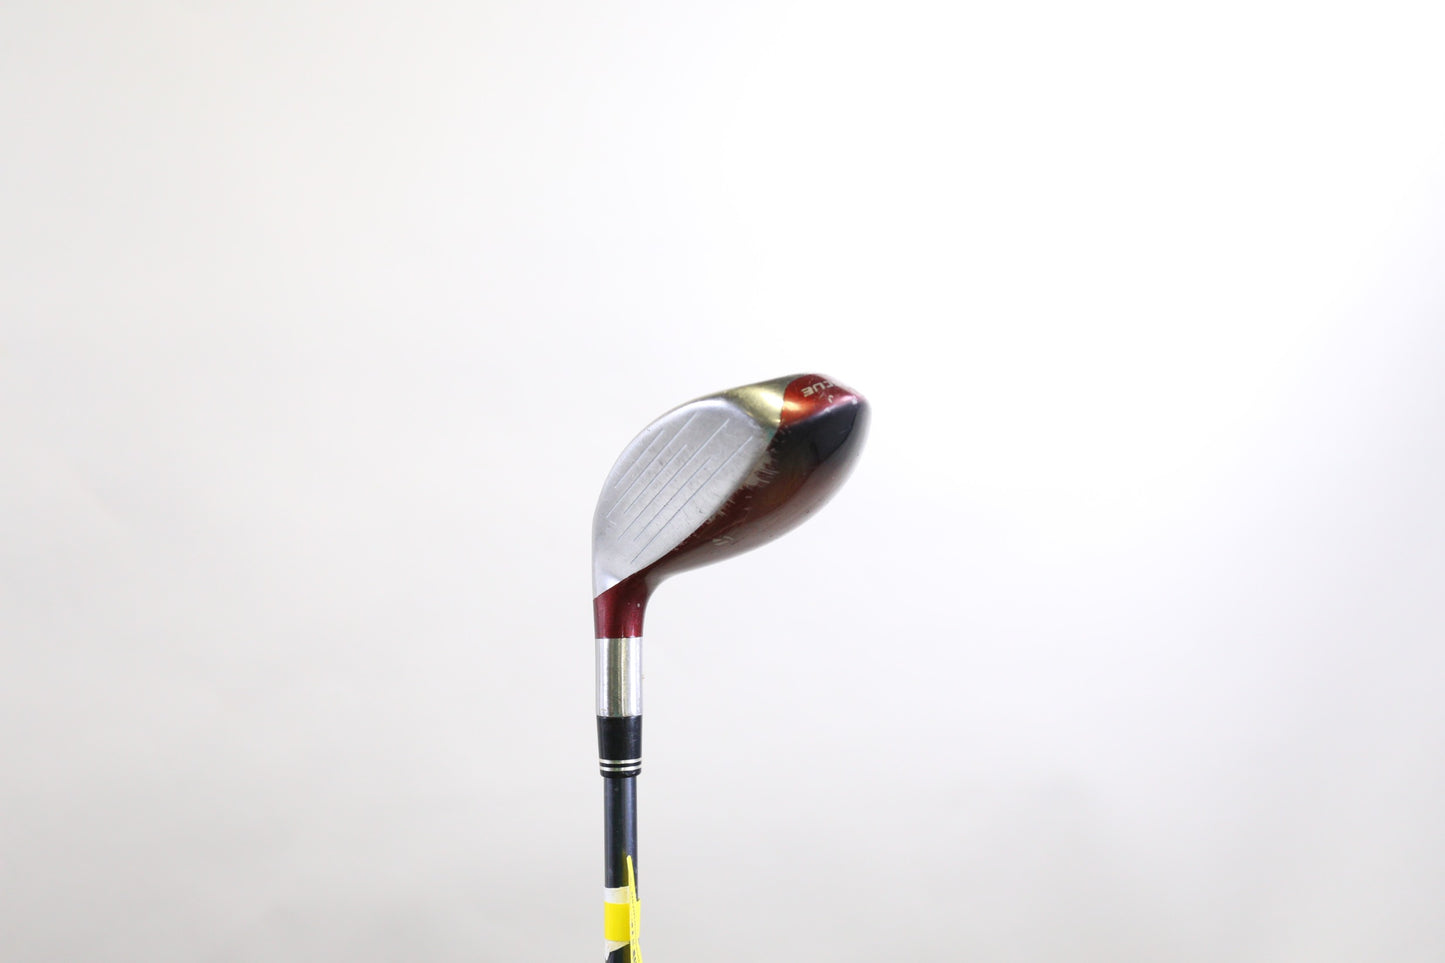 Used TaylorMade r7 Draw Rescue 4H Hybrid - Right-Handed - 22 Degrees - Regular Flex